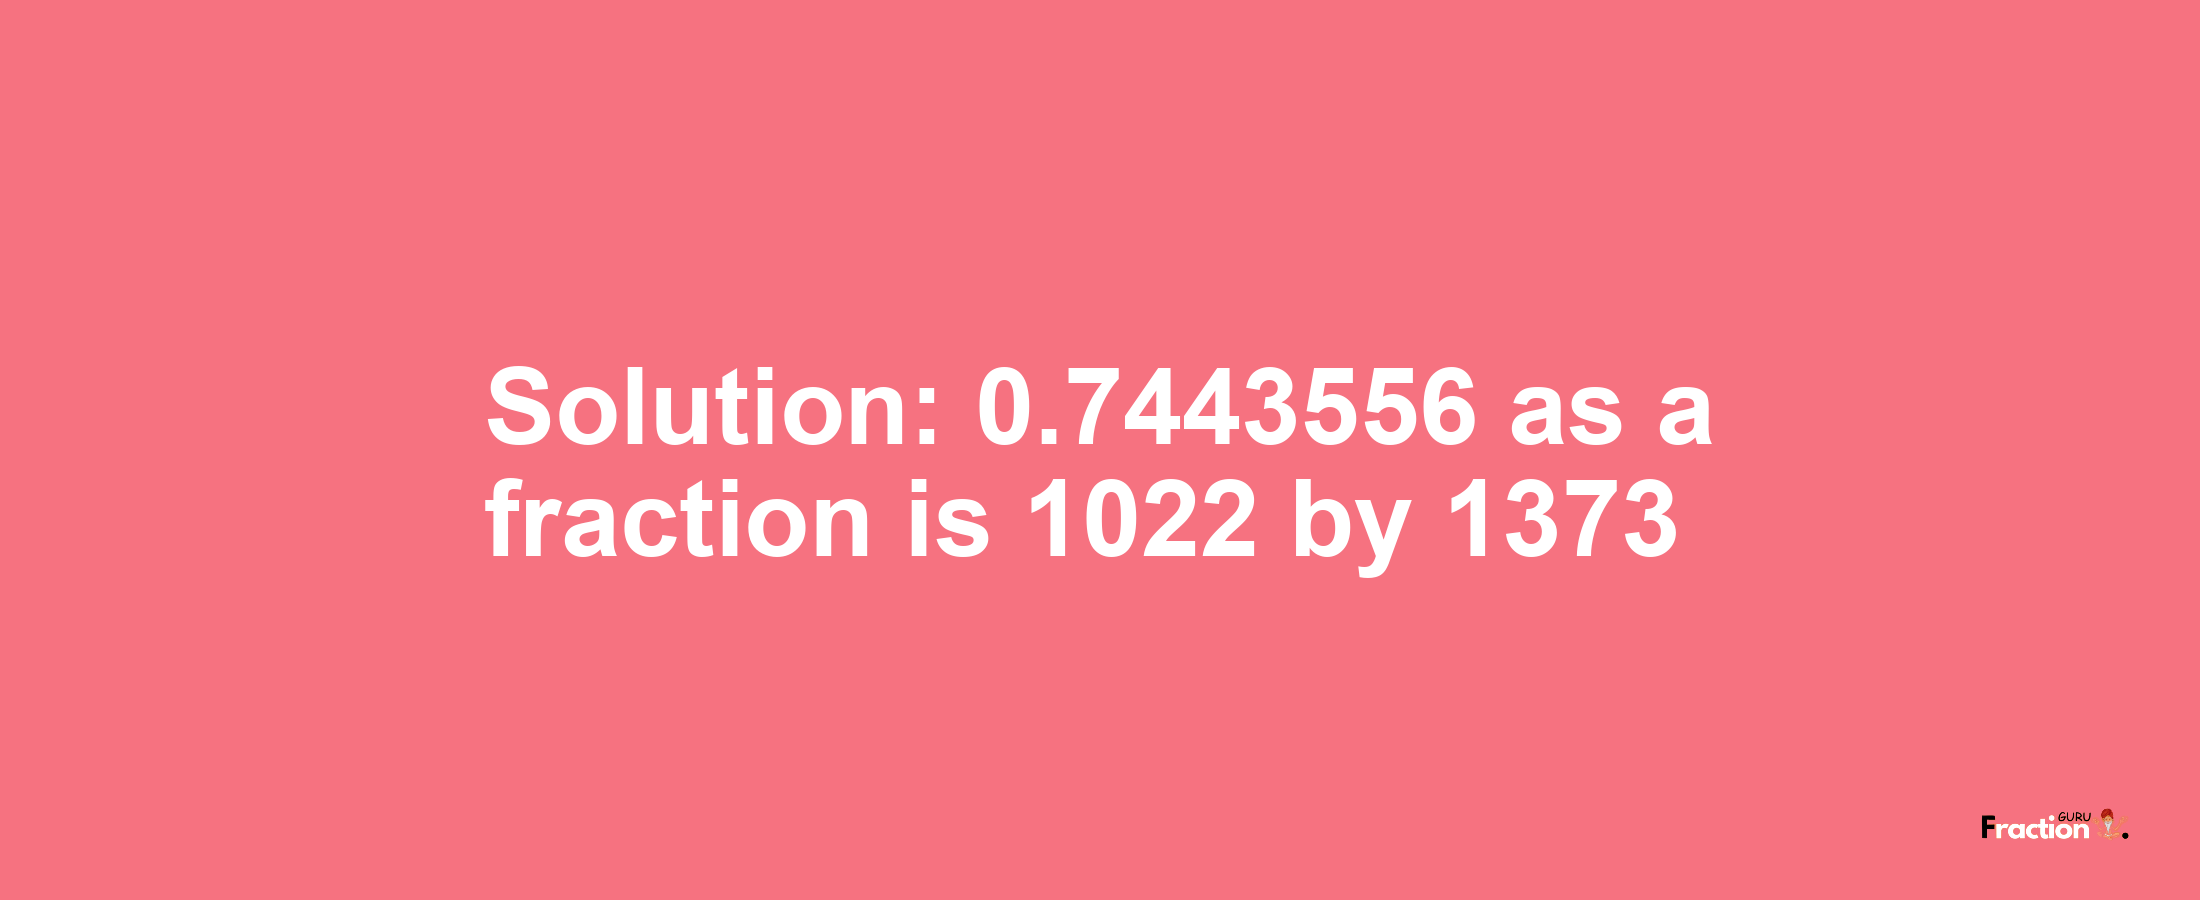 Solution:0.7443556 as a fraction is 1022/1373